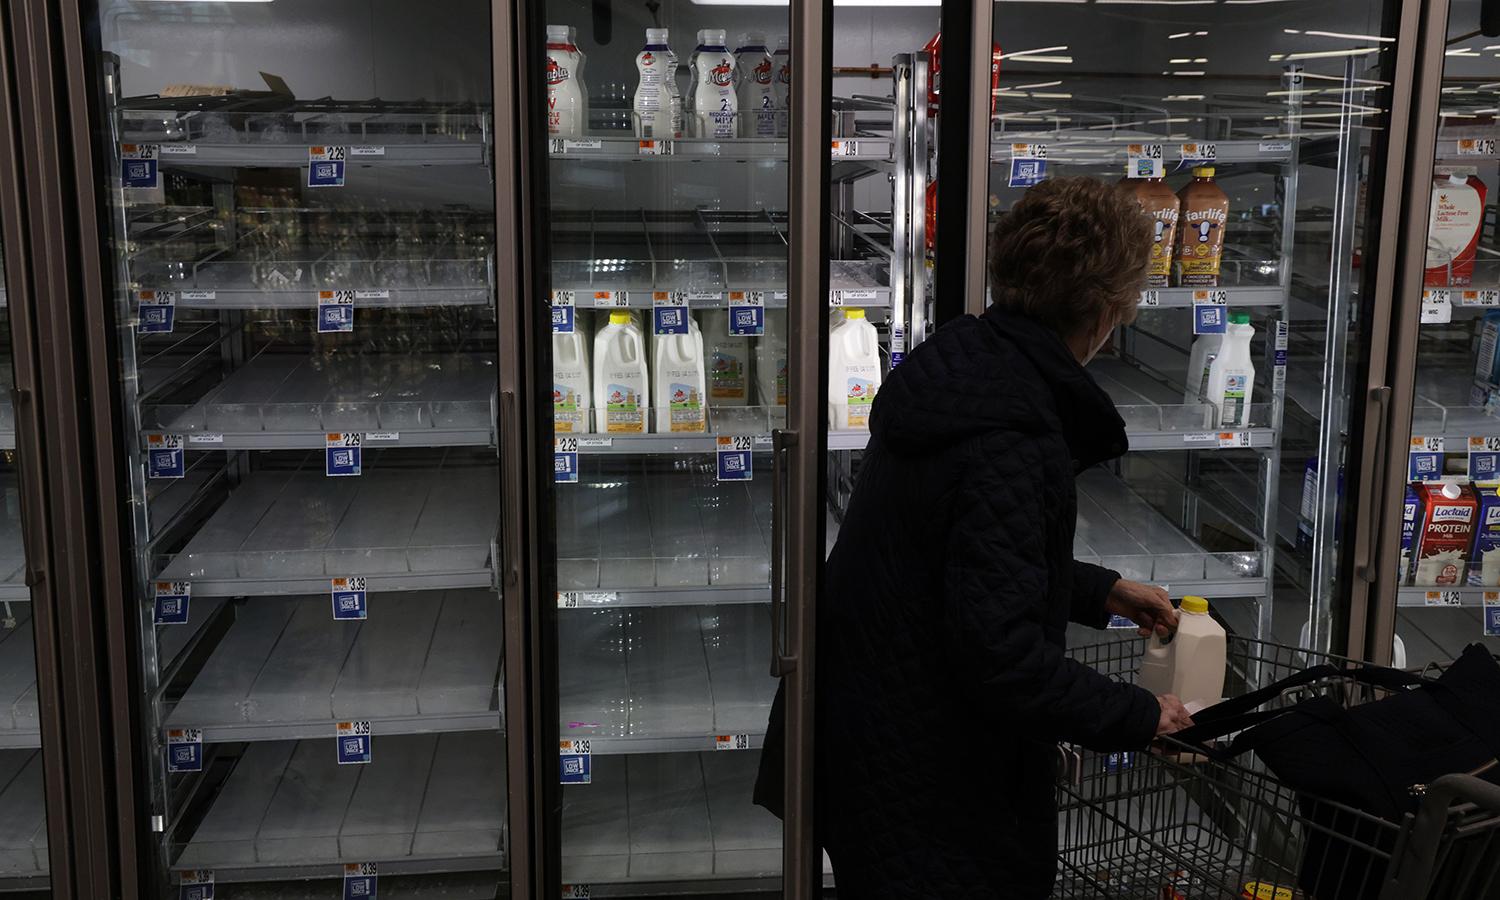 Difficulties related to supply chains is costing 38% of organizations at least $500,000 a year, according to research by Cleo. Pictured: A woman takes a jug of milk off of depleted refrigerated shelves at a Giant Food Supermarket Jan. 12, 2022, in Springfield, Va. (Photo by Alex Wong/Getty Images)